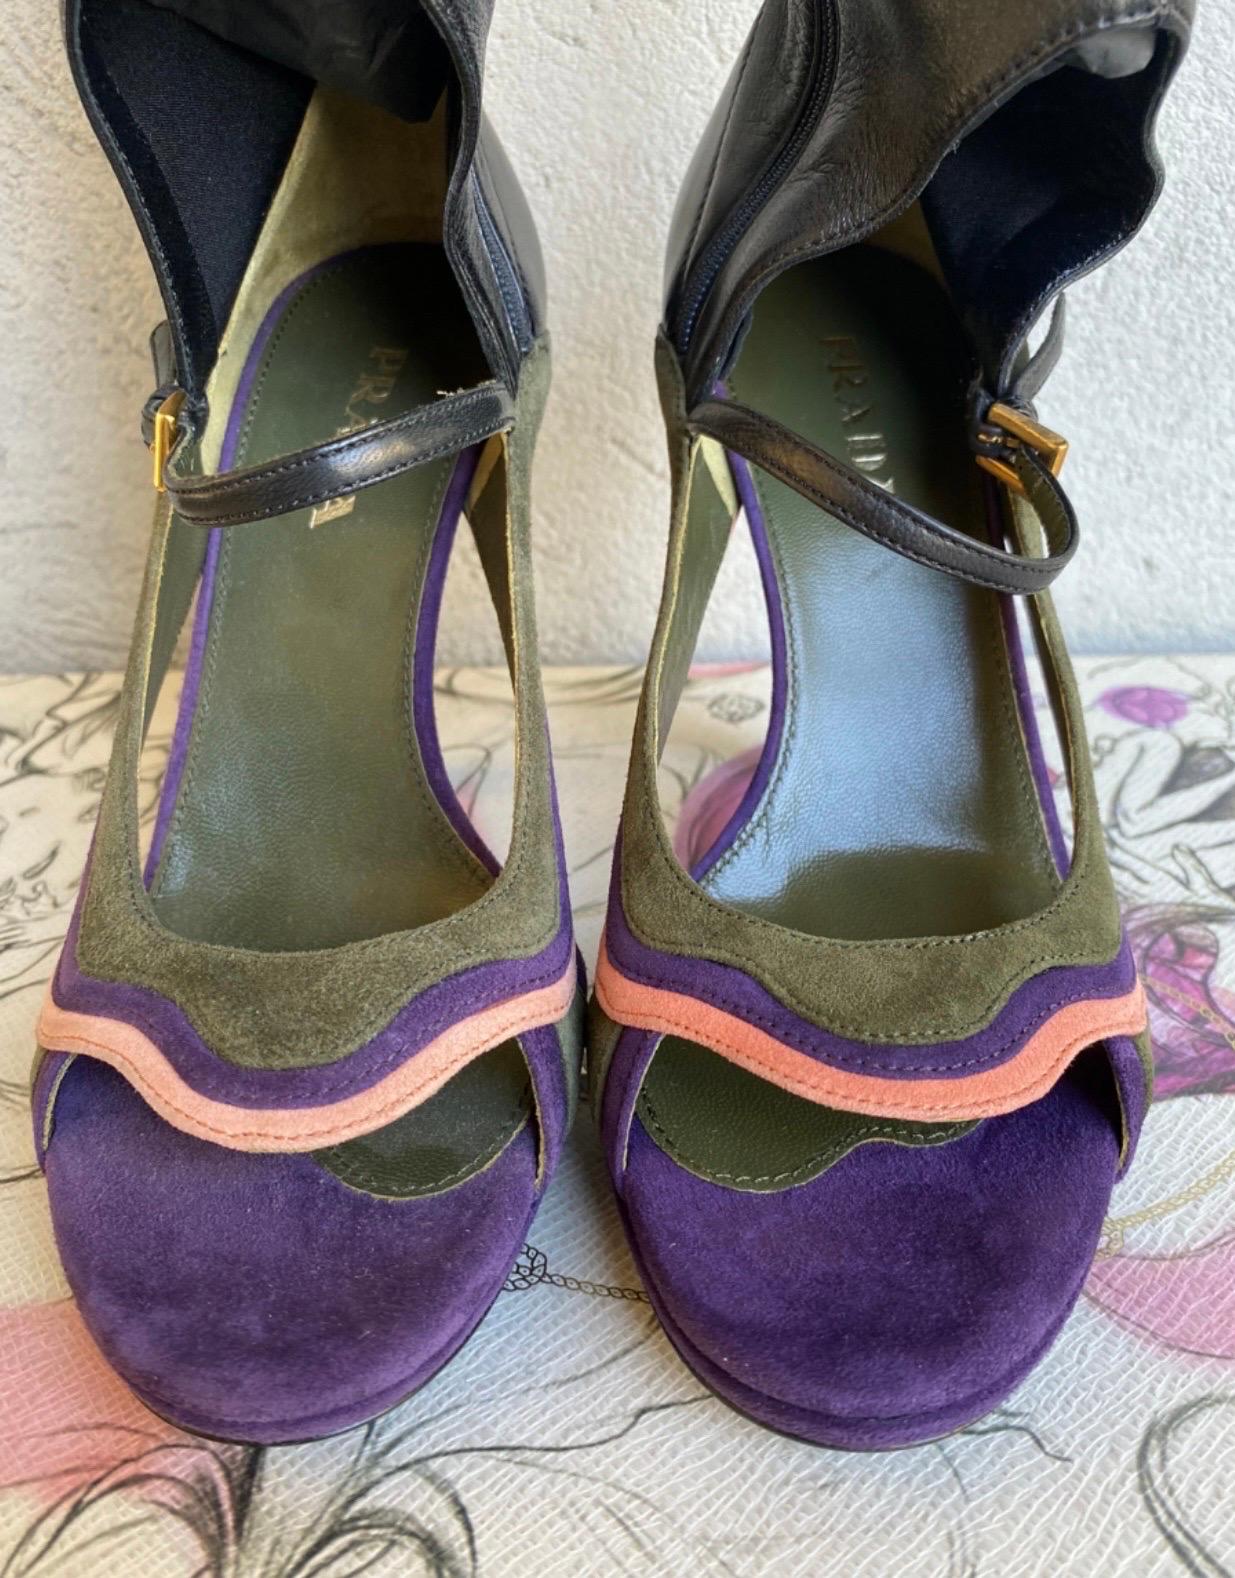 Prada, Waves color ankle boot, Spring 2008 Ready to Wear, size 37.5, the heel measures 11 cm, the lower part is in green, pink and purple suede, the upper part in black nappa leather, with internal zip for a simple fit, practically never used with